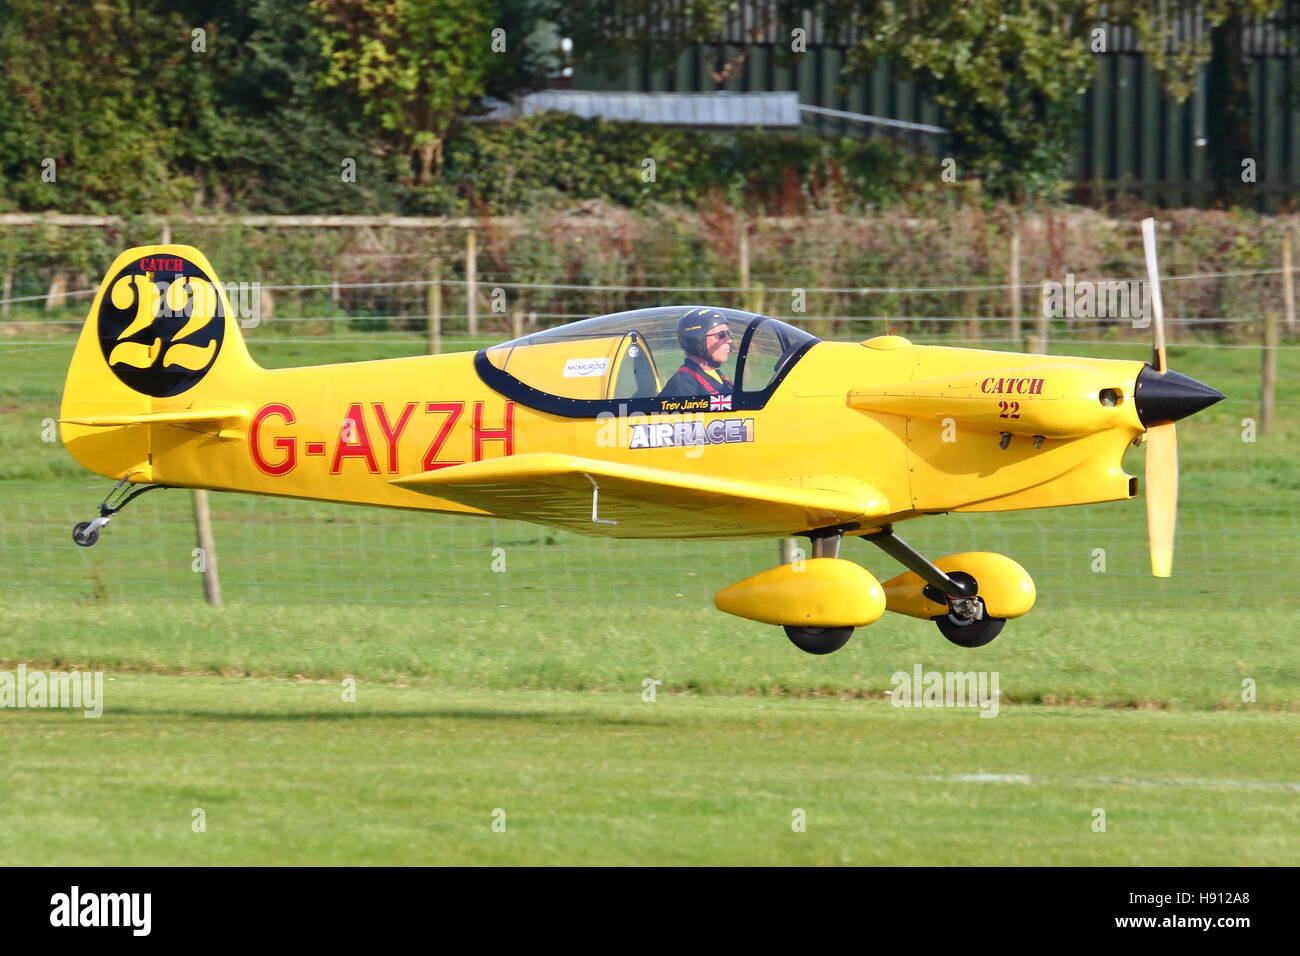 Taylor JT-2 Titch G-AYZH at the Old Warden Air Show Stock Photo